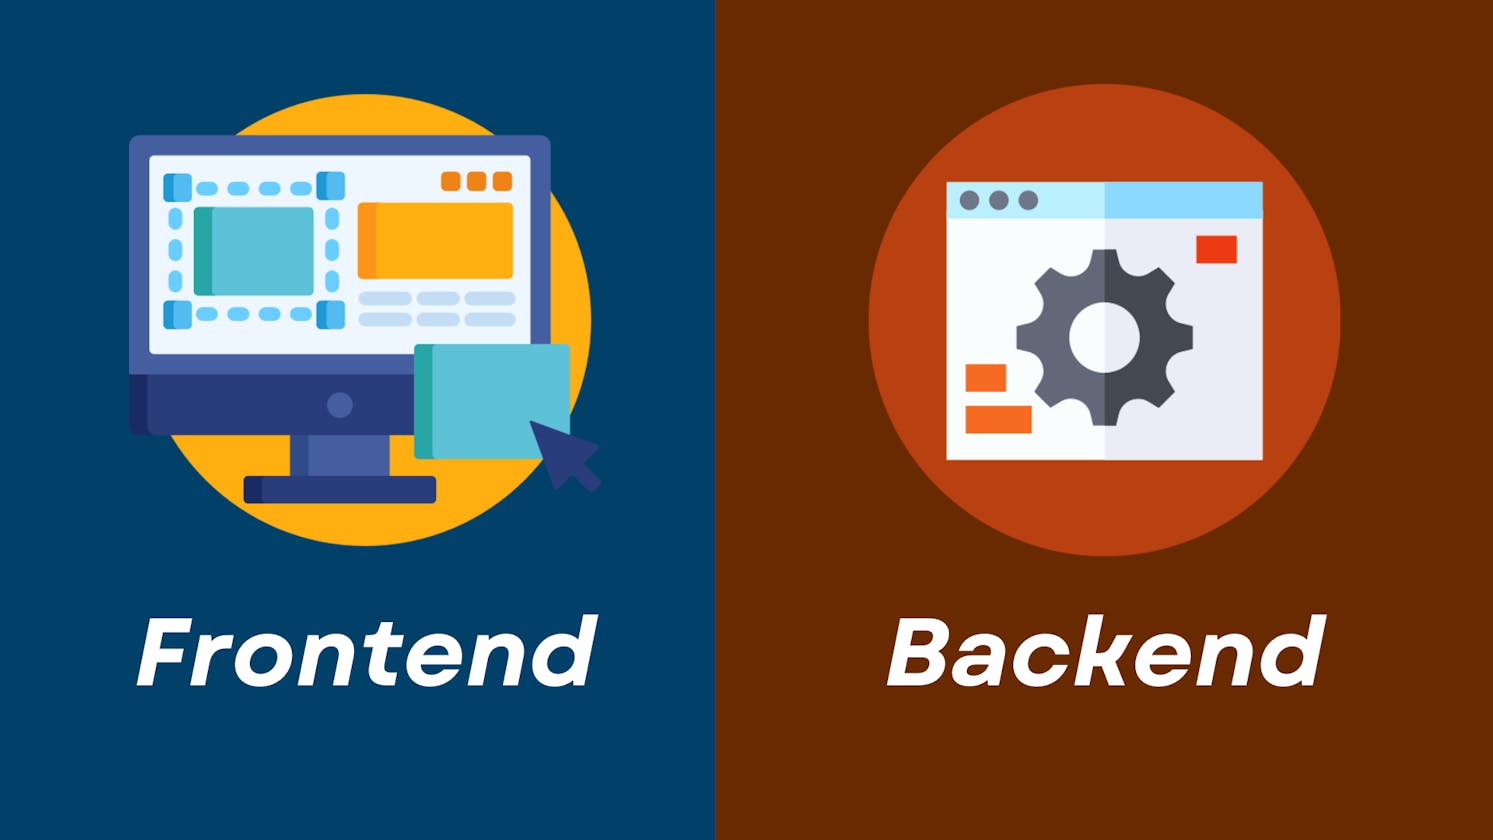 Learn Full Stack Developer Course Online - Master Frontend and Backend Development